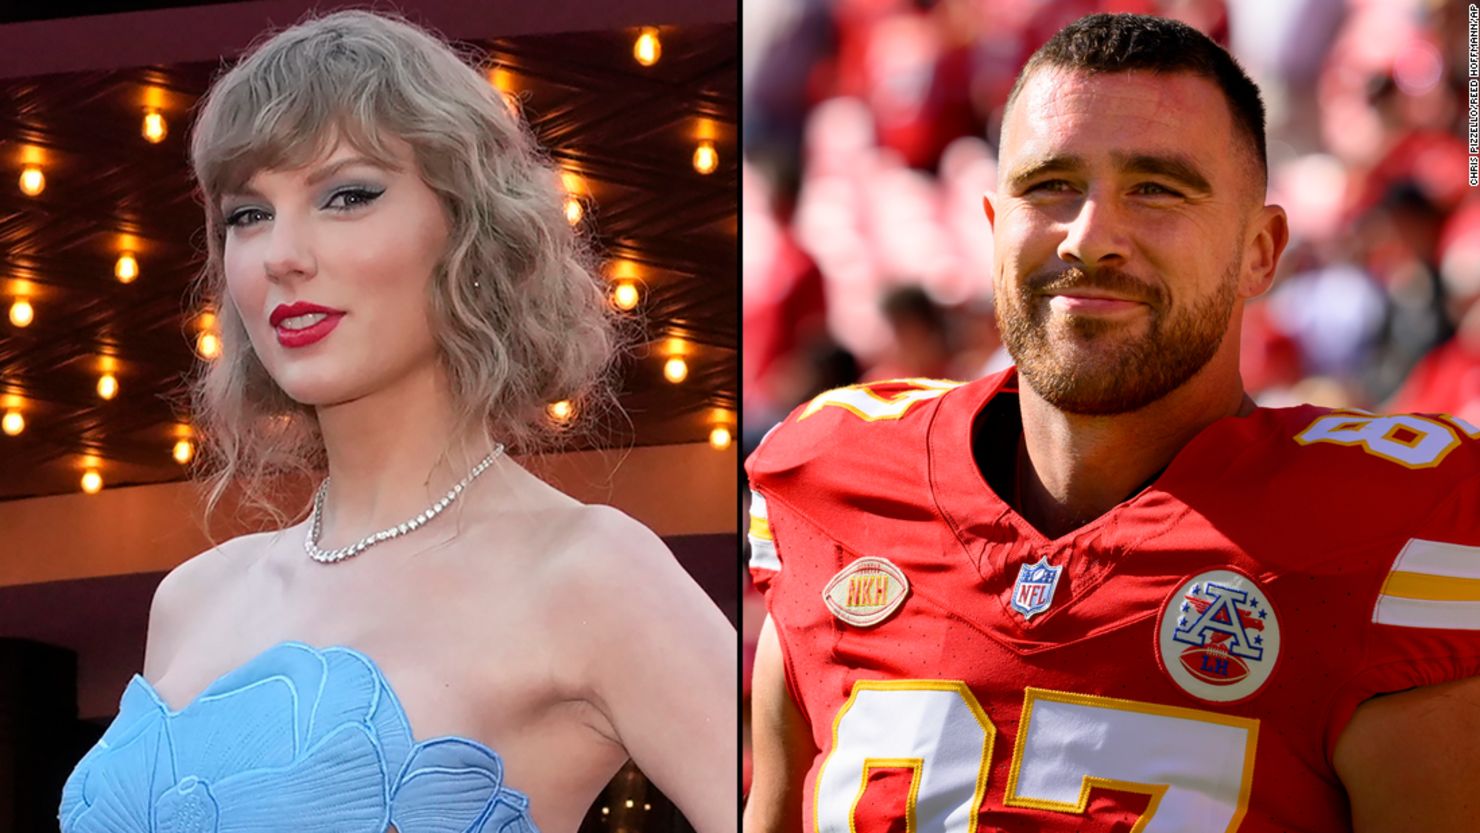 lyrics you might relate to on X: taylor swift / end game https